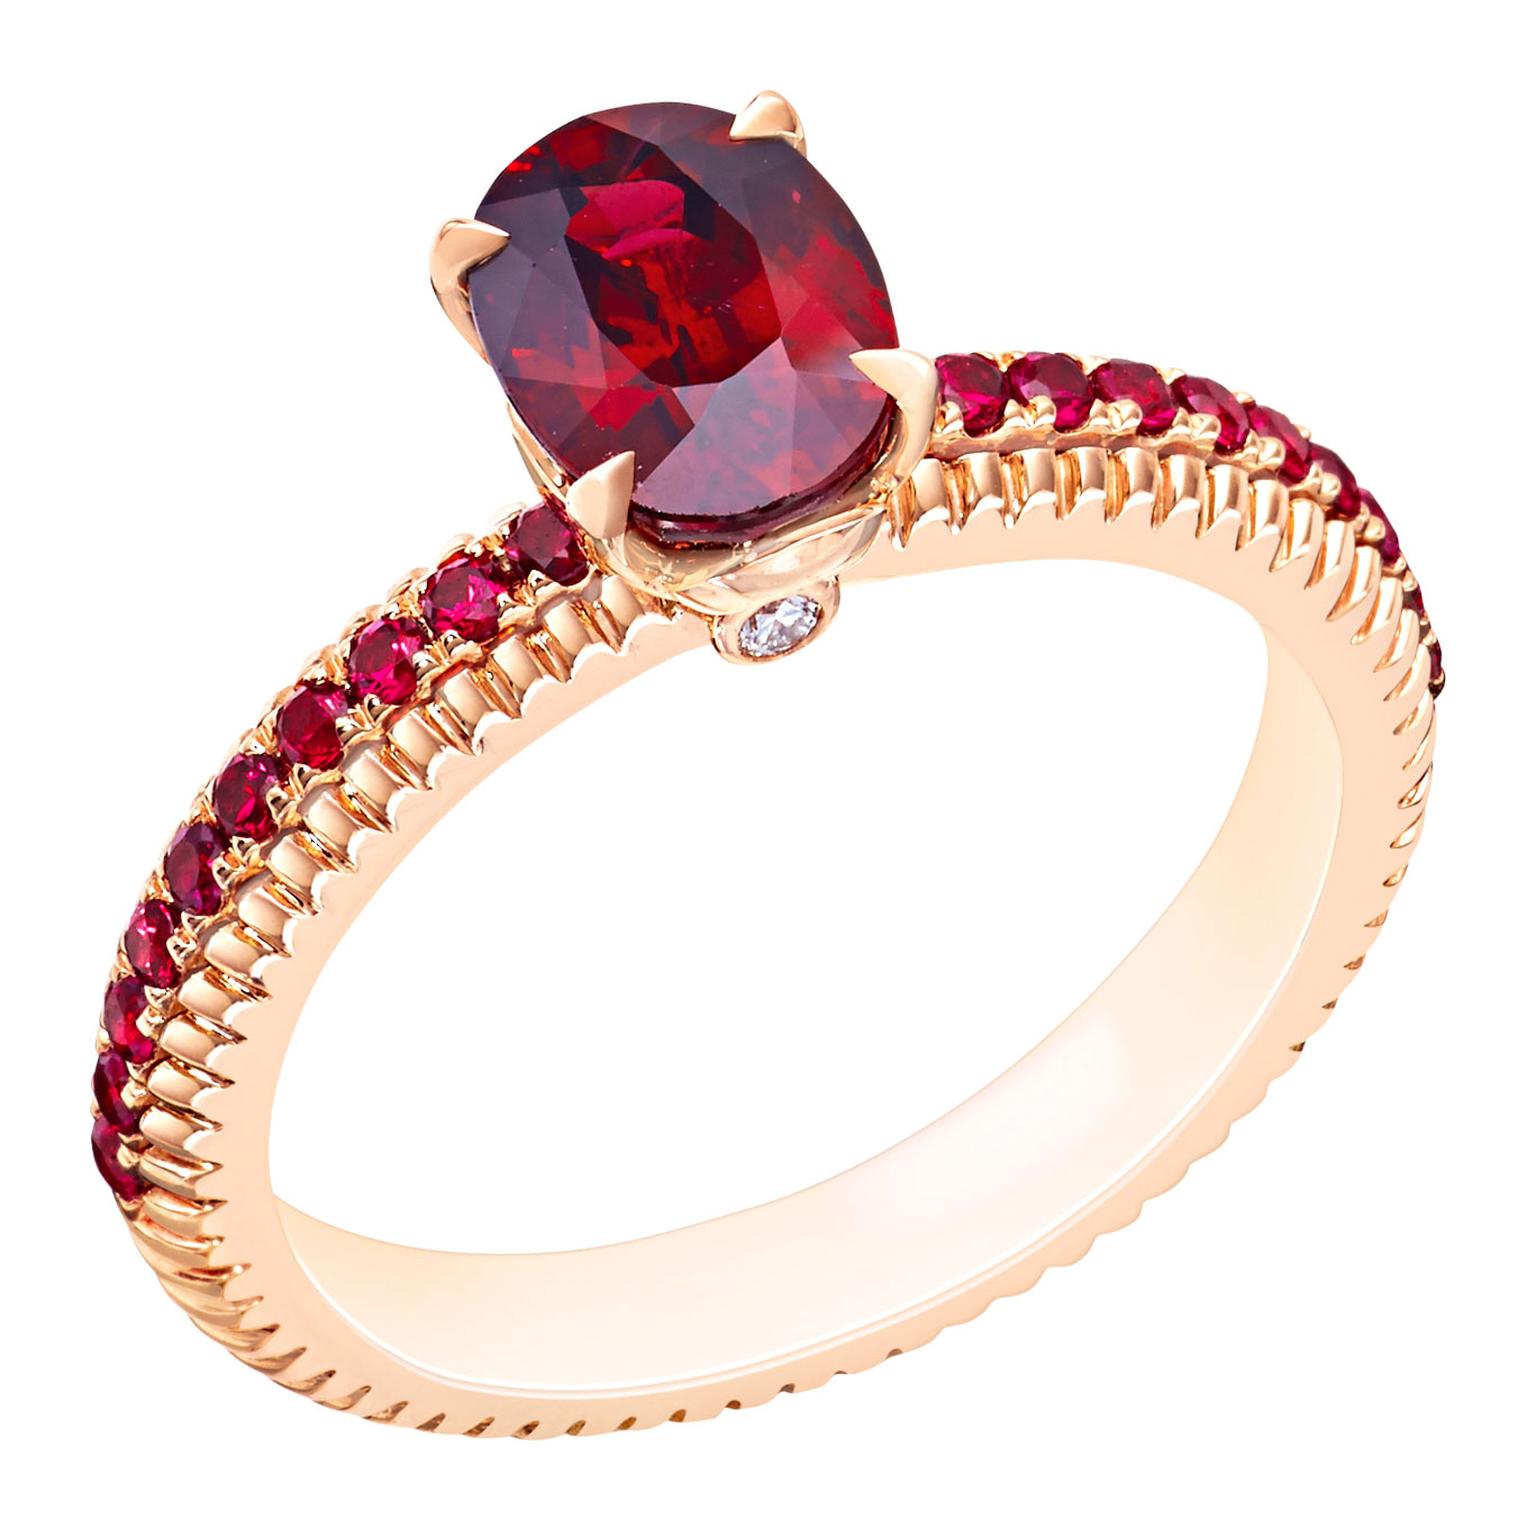 Ruby Fluted Engagement Ring With Ruby Pave   1536x0 Q75 Crop Scale Subsampling 2 Upscale False 